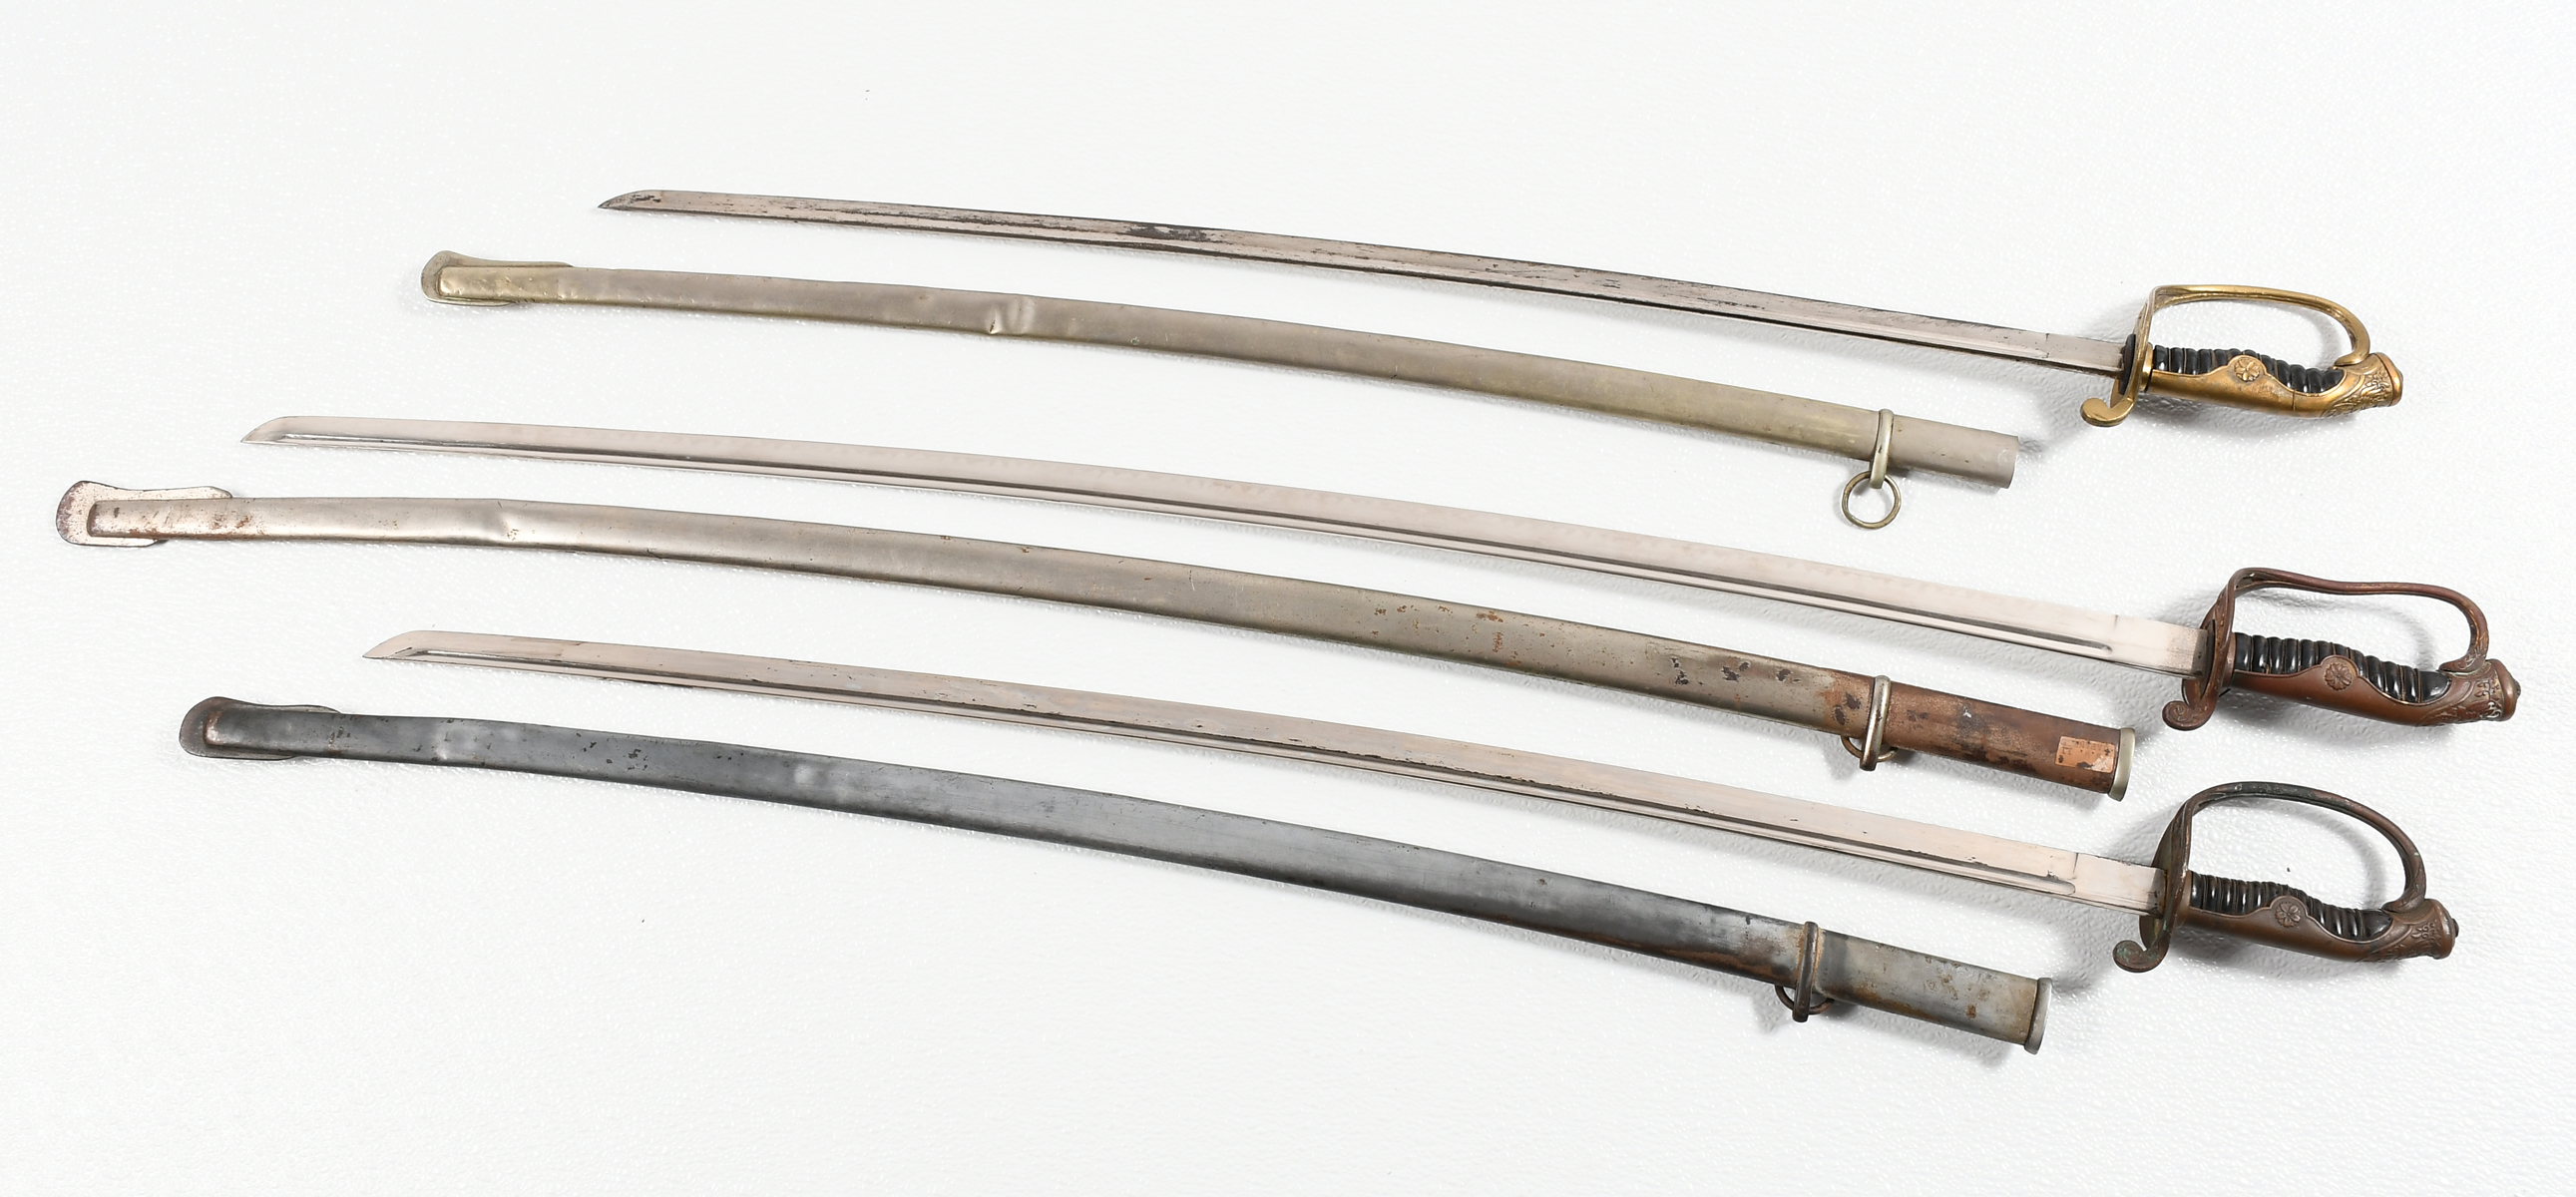 THREE JAPANESE WWII SABRES WITH